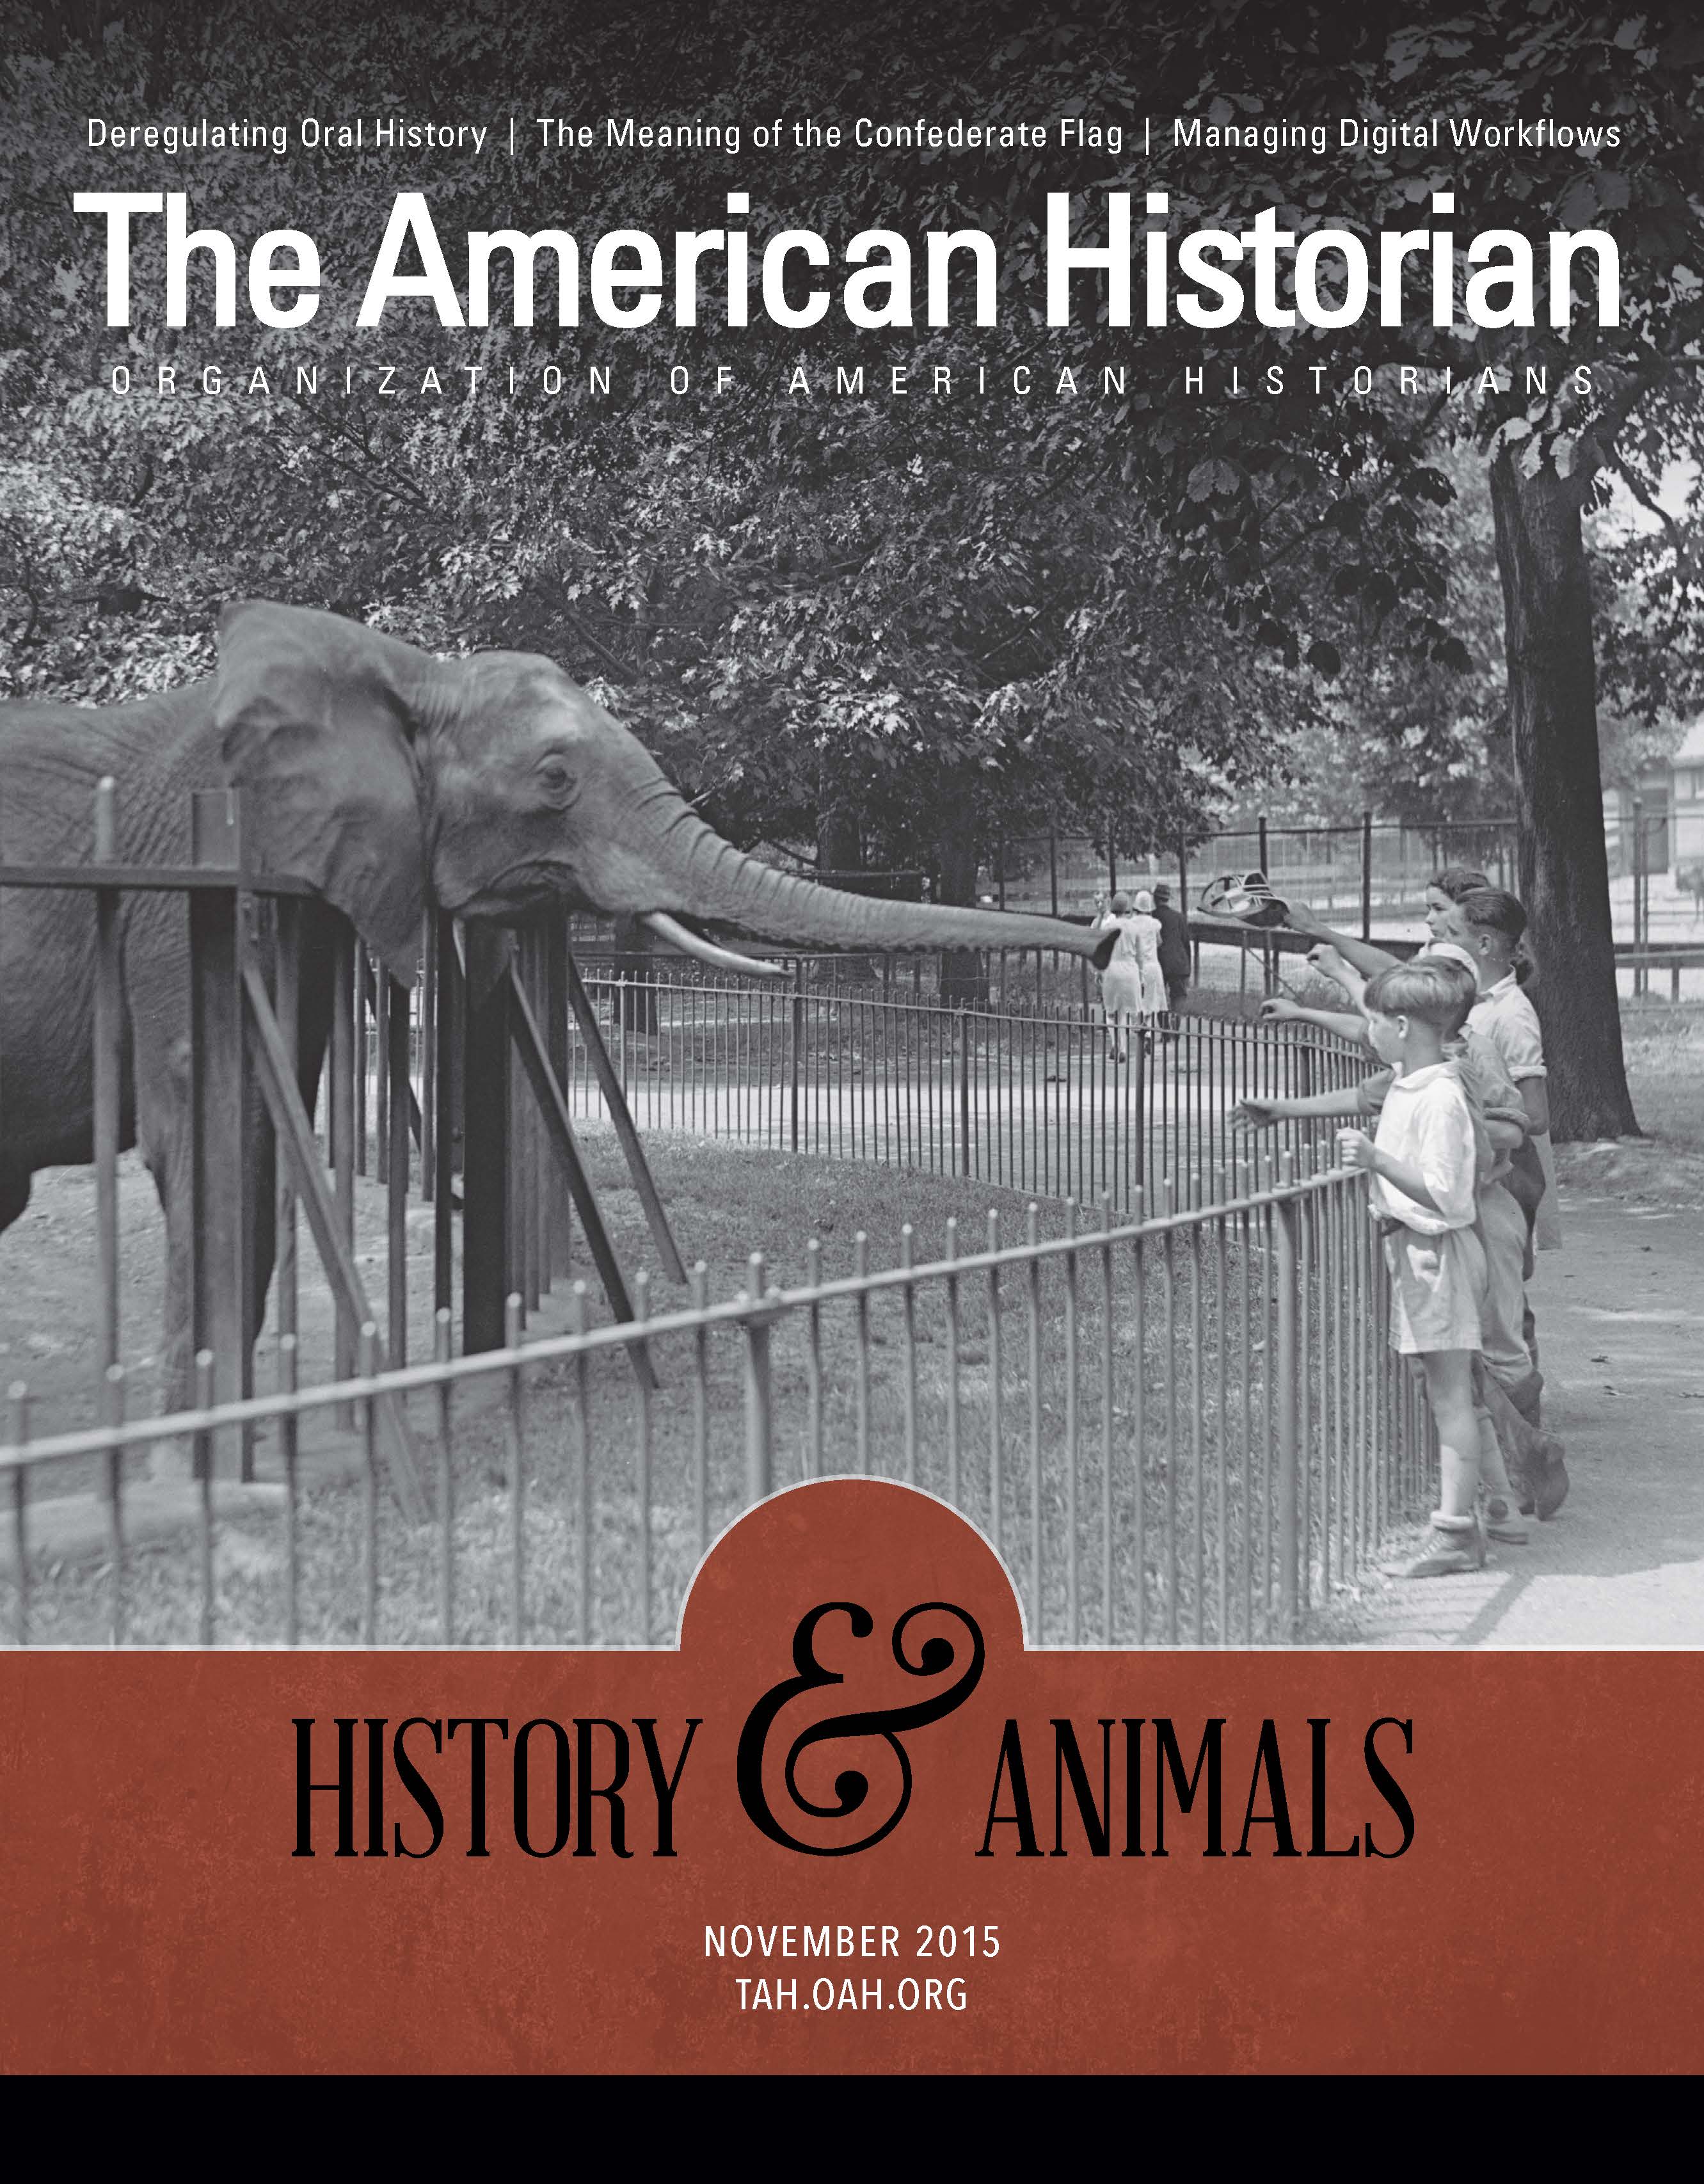 Children feed an elephant at a zoo in the photograph used for this issue's cover, and title of 